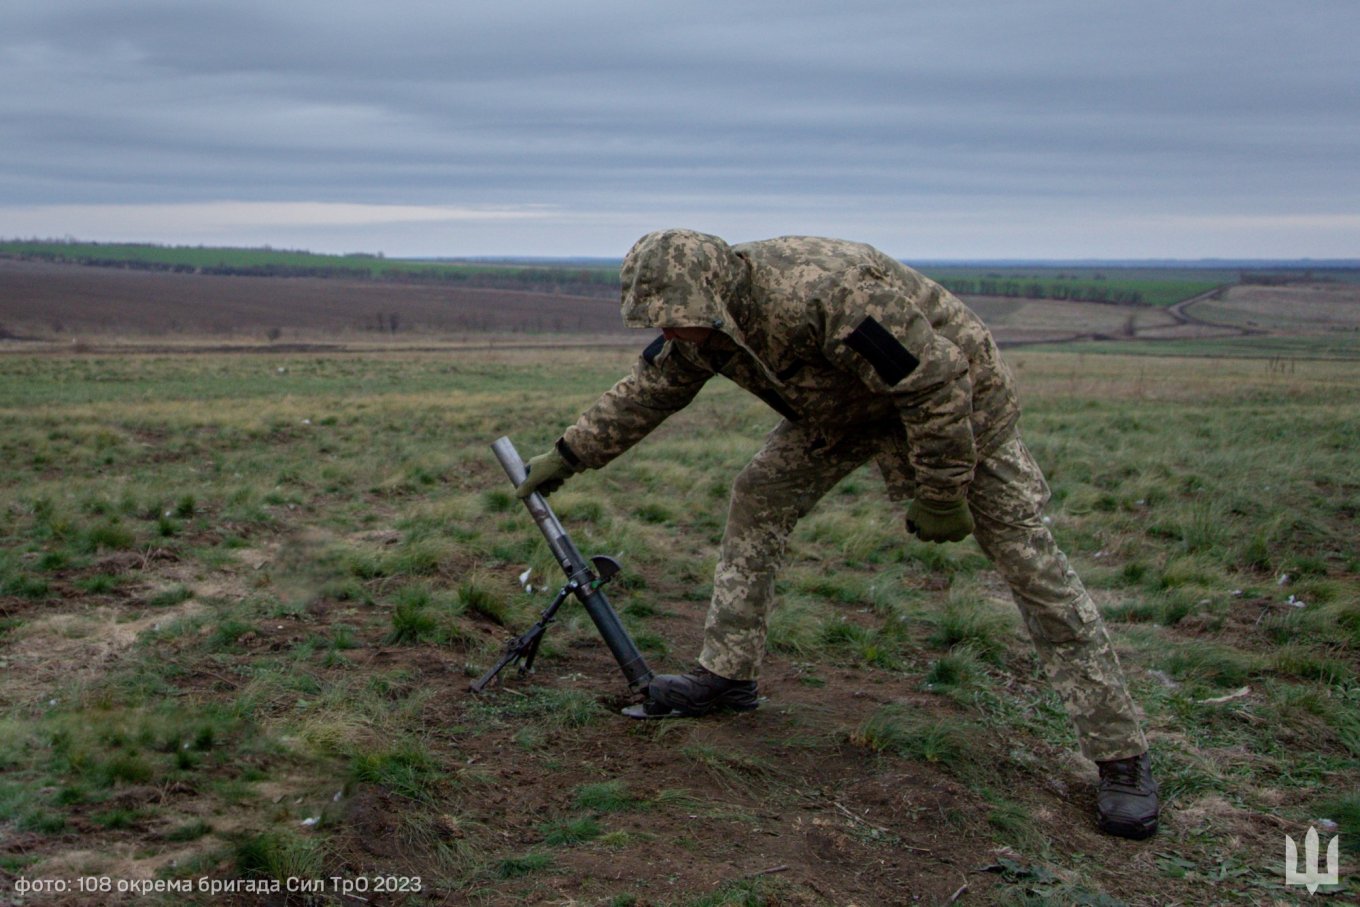 Filed tests of a Ukrainian unique grenade-launching mortar